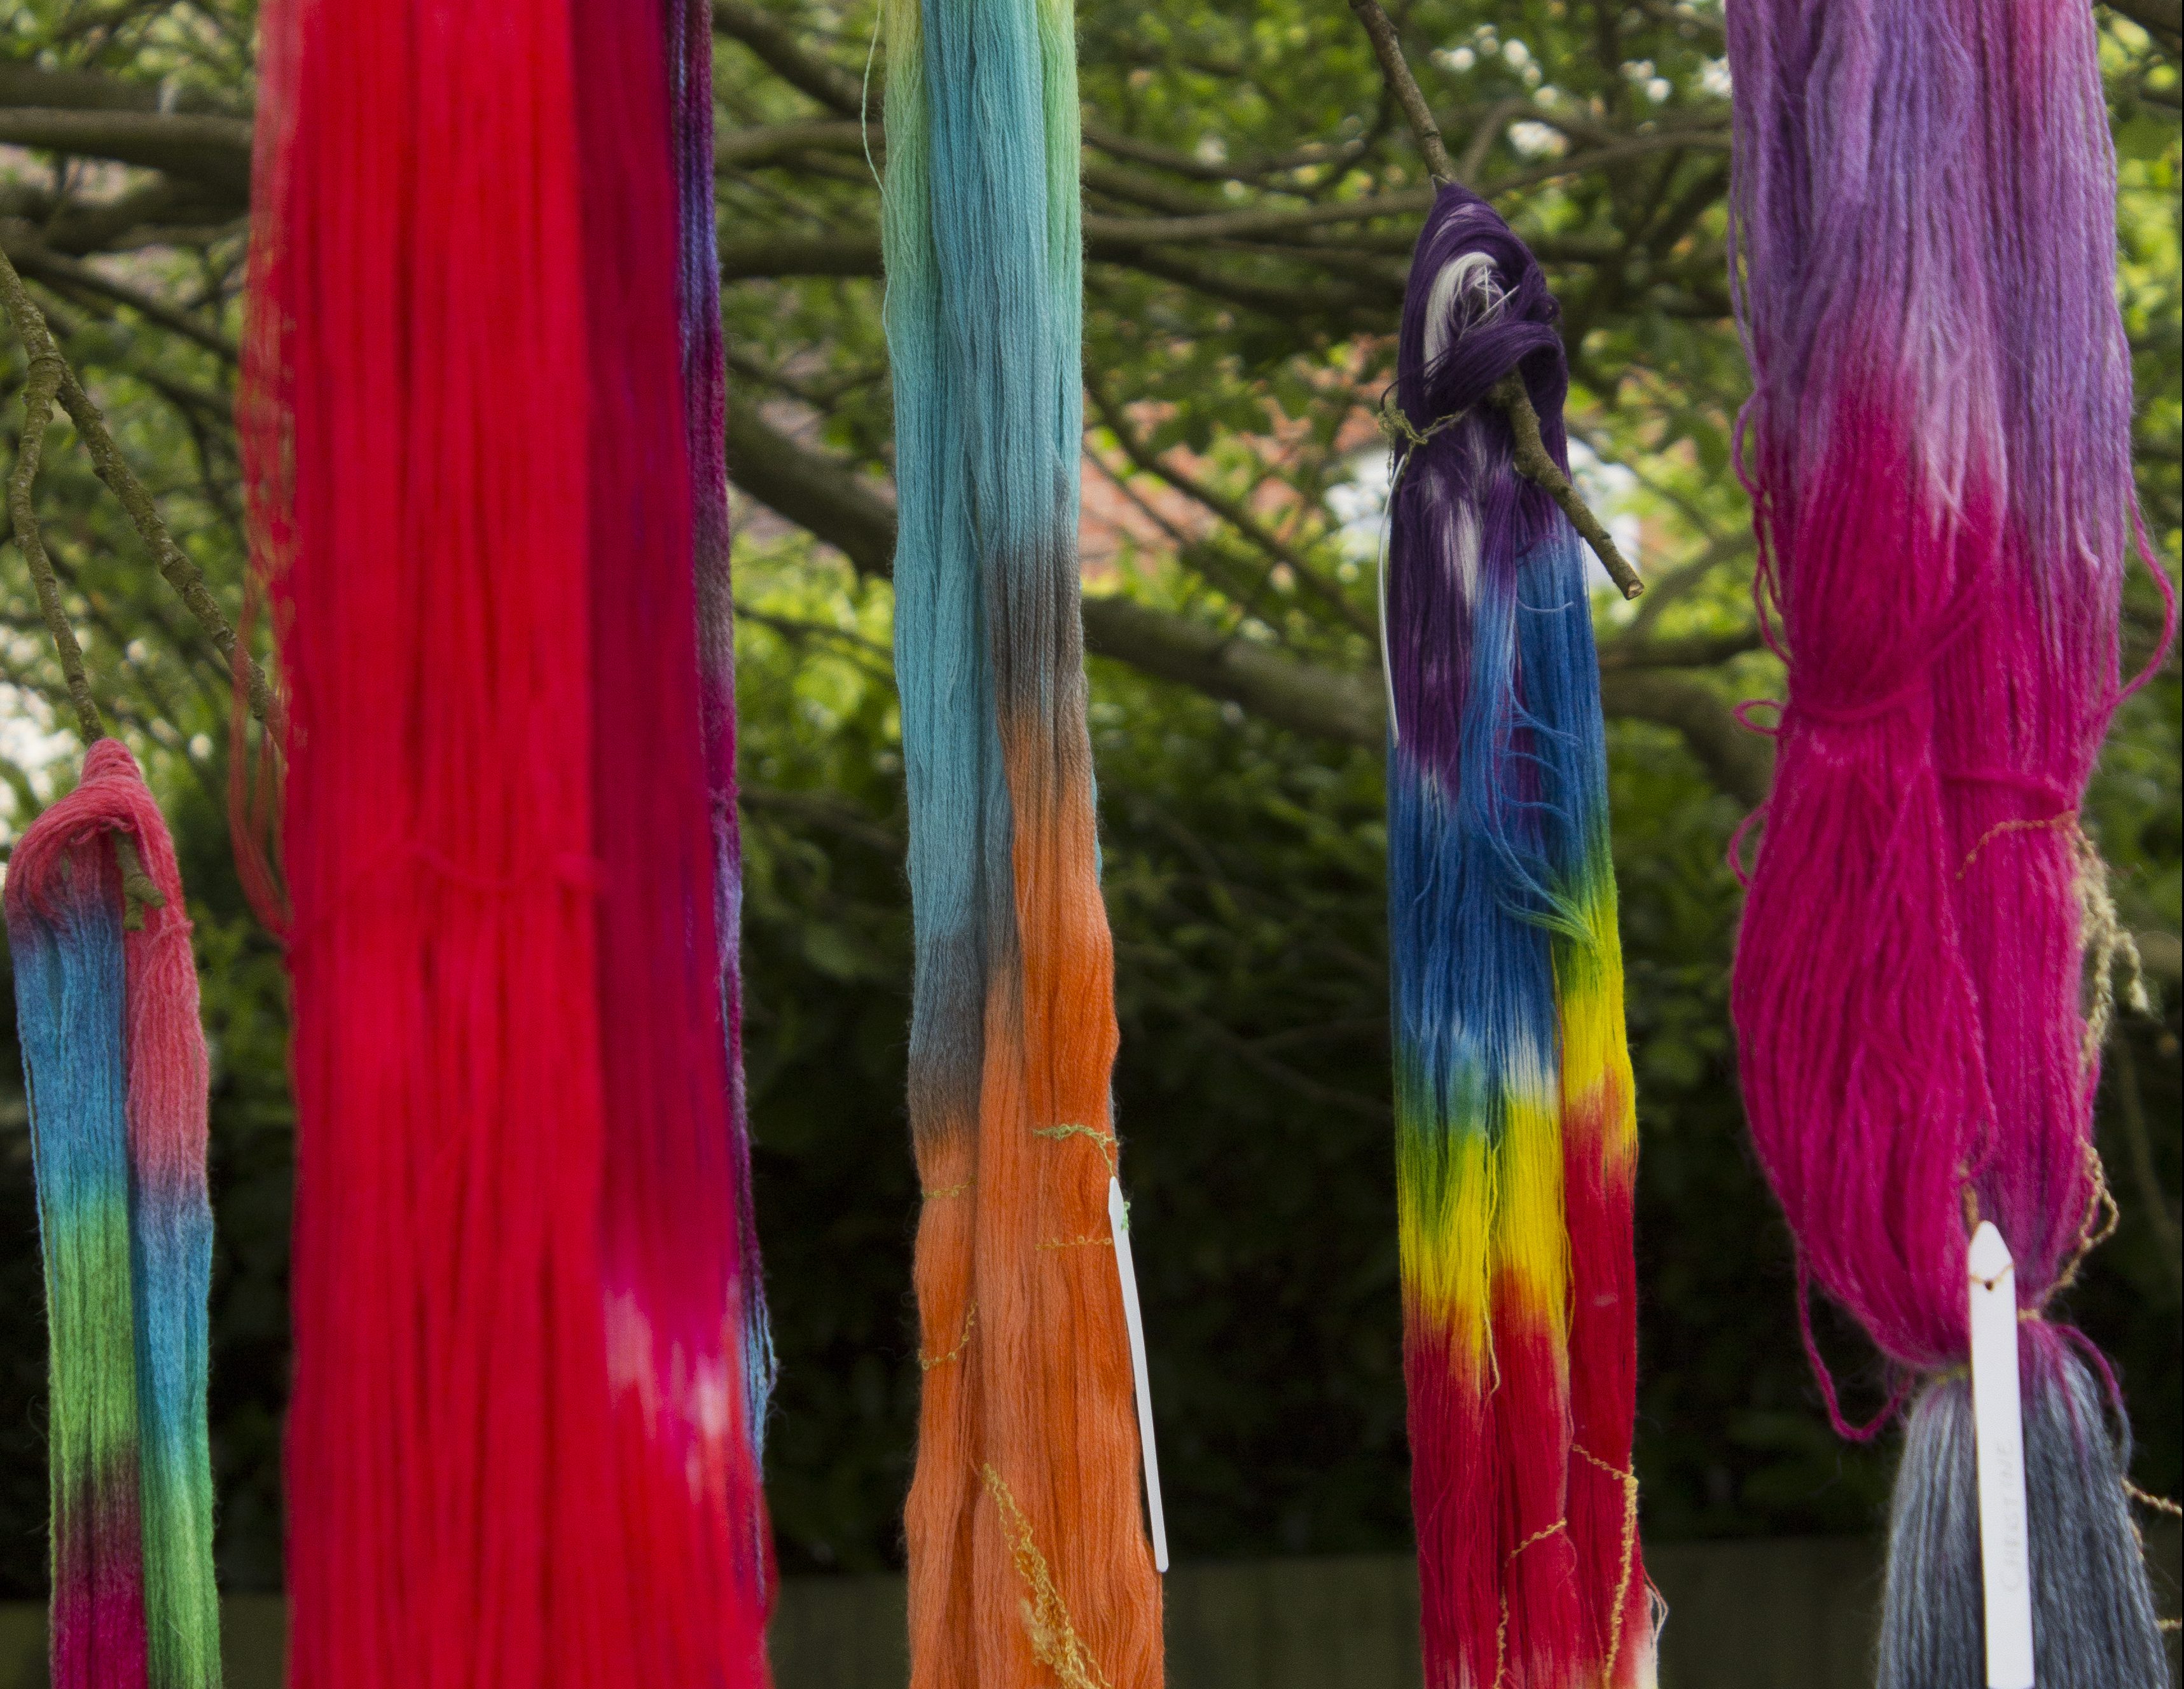 Introduction to Hand-dyeing with Synthetic Dyes with Debbie Tomkies at Black Sheep Wools, Culcheth